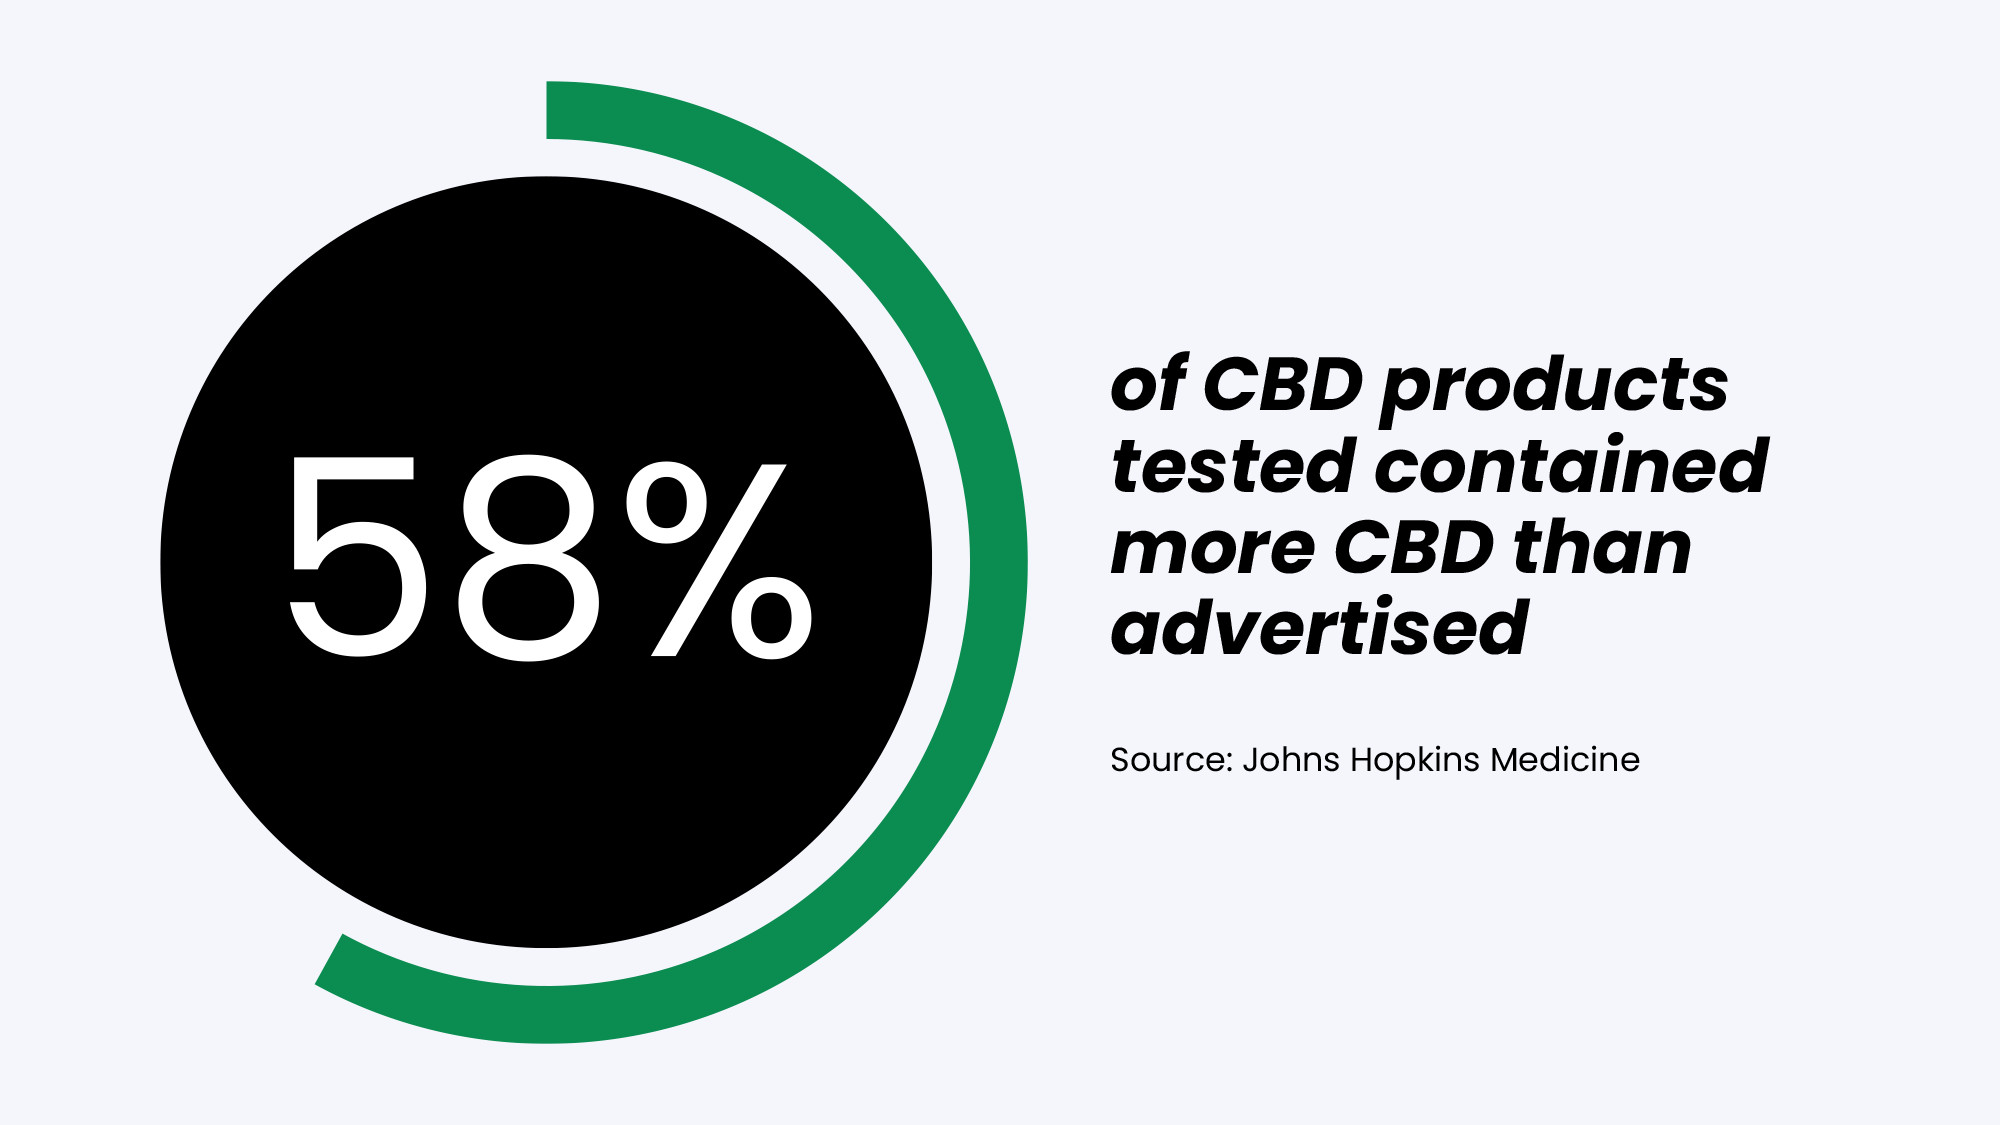 58% of CBD products tested contained more CBD than advertised